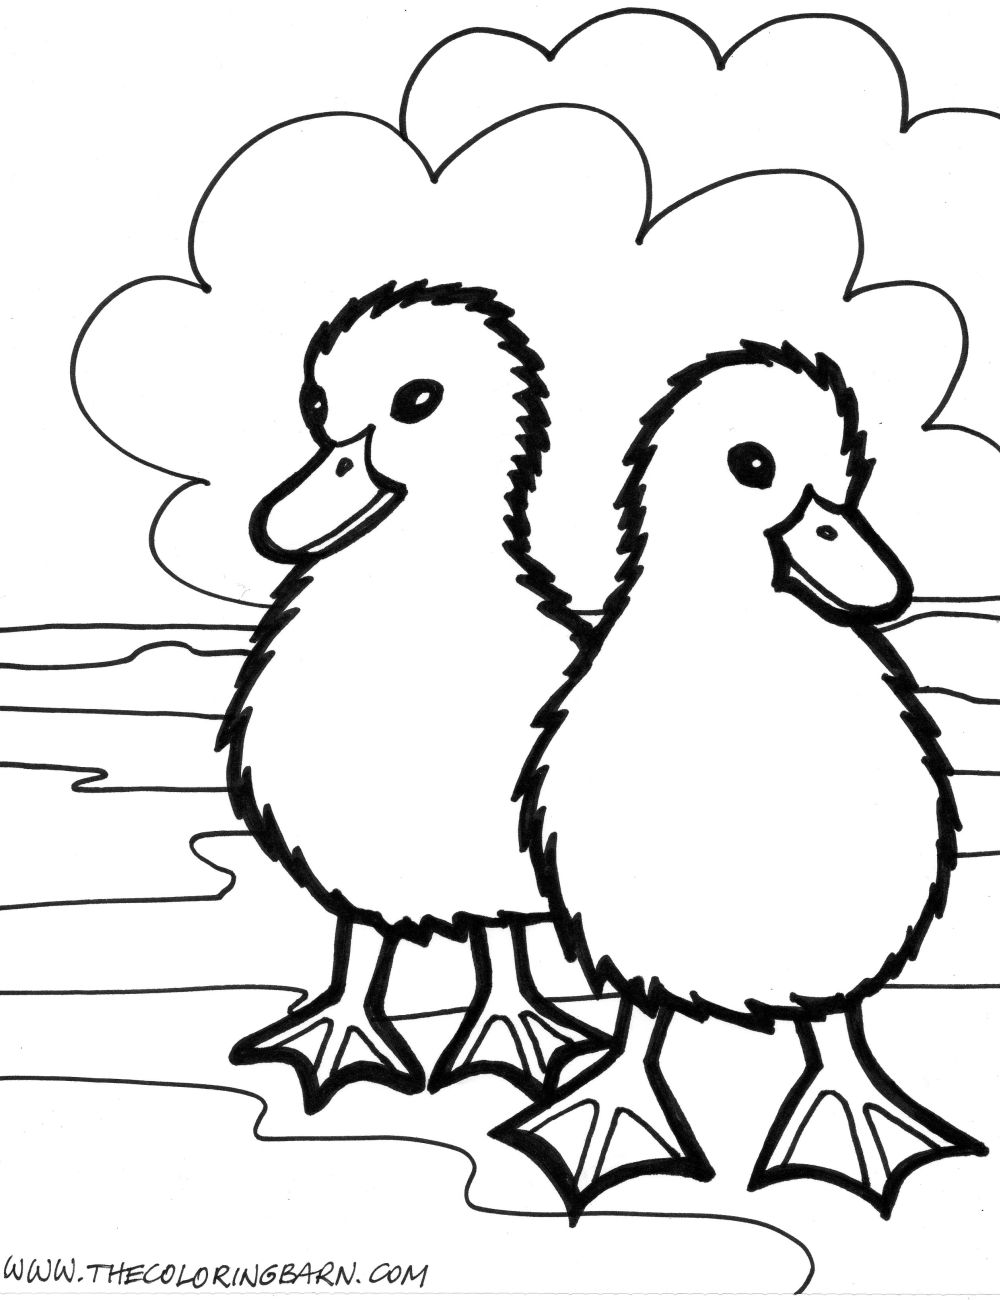 Farm animal coloring pages to download and print for free